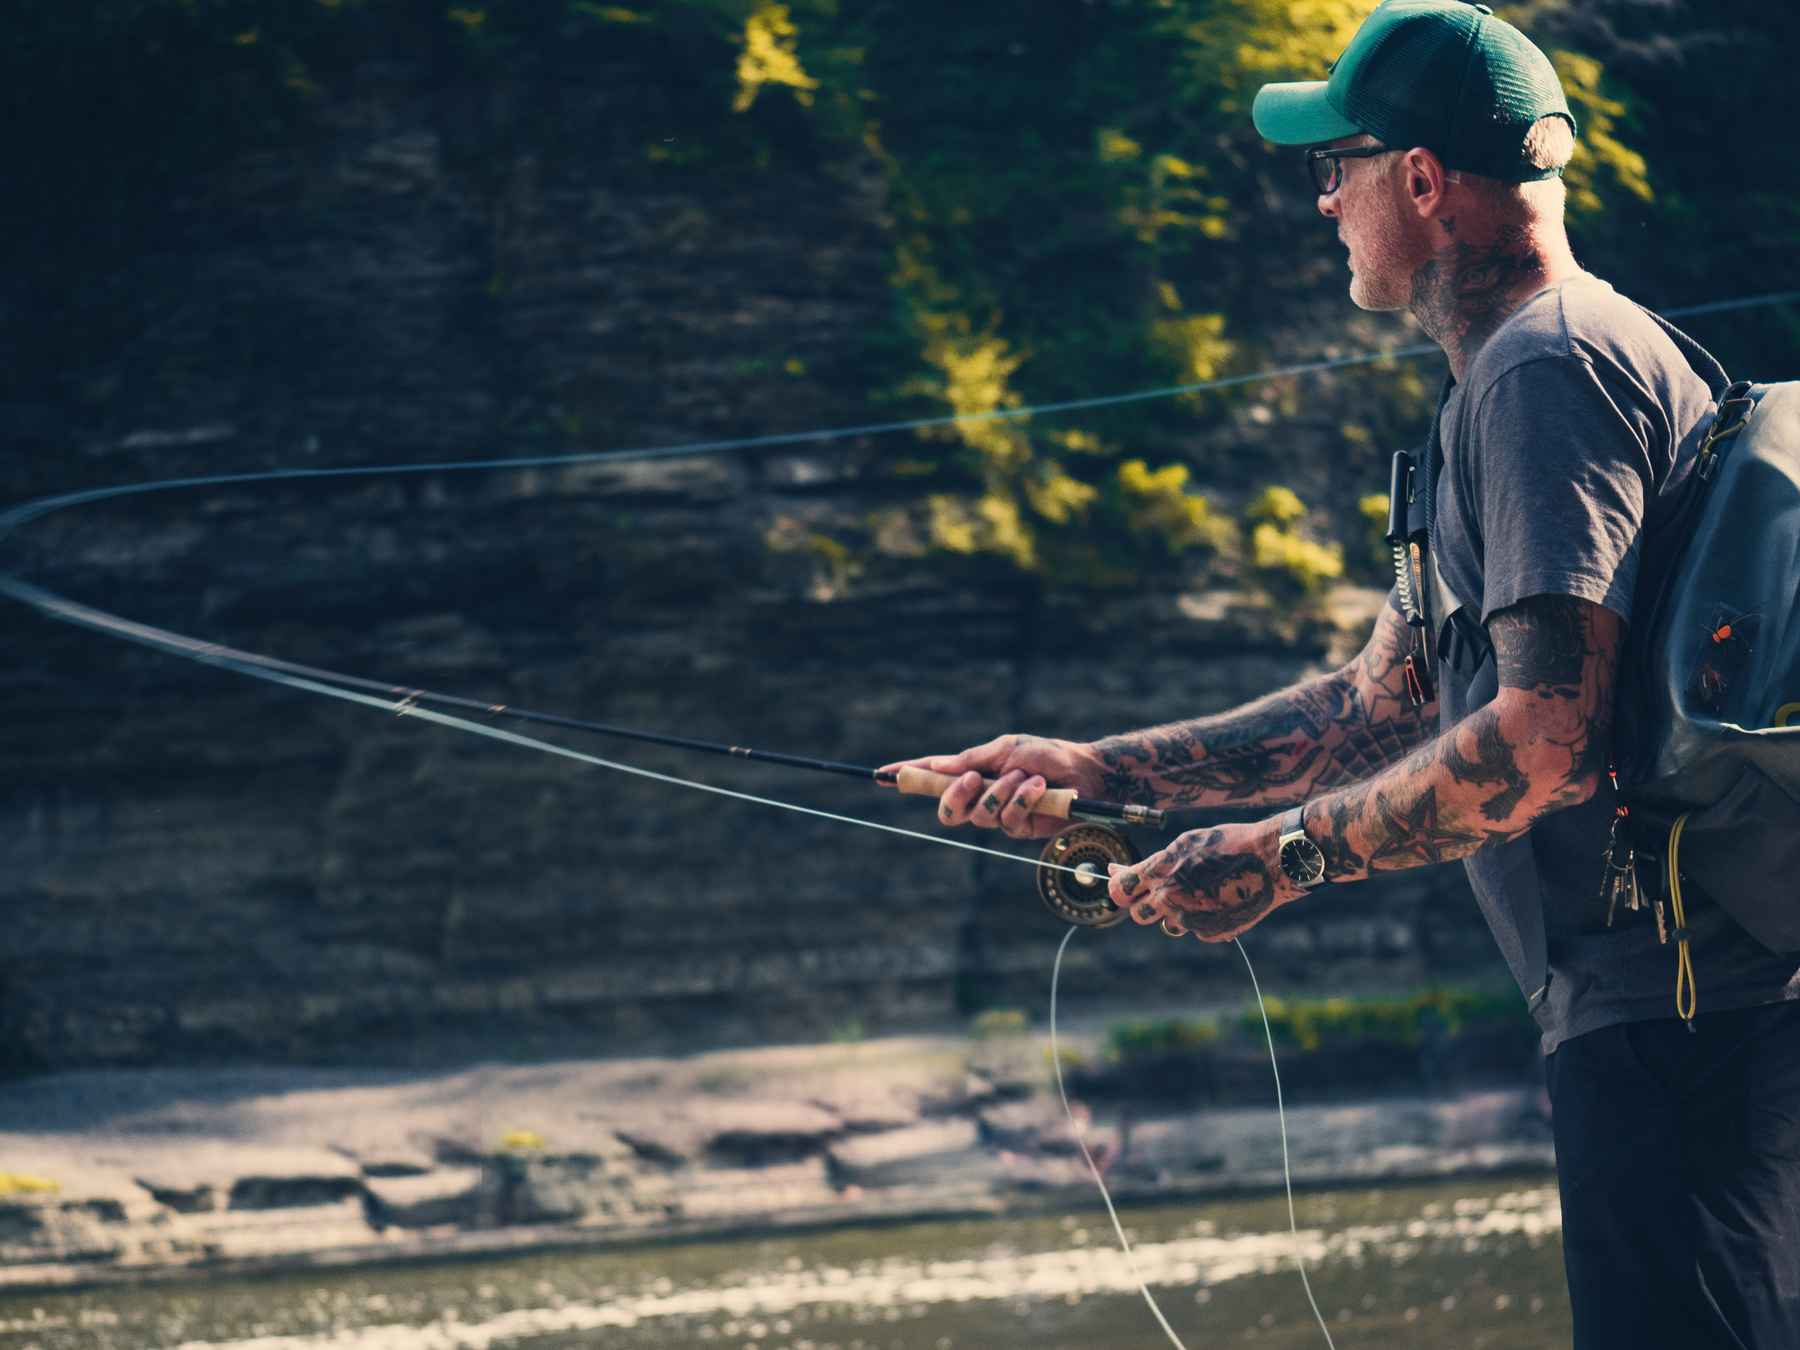 Fly fishing: Rods, reels, fly lines and more